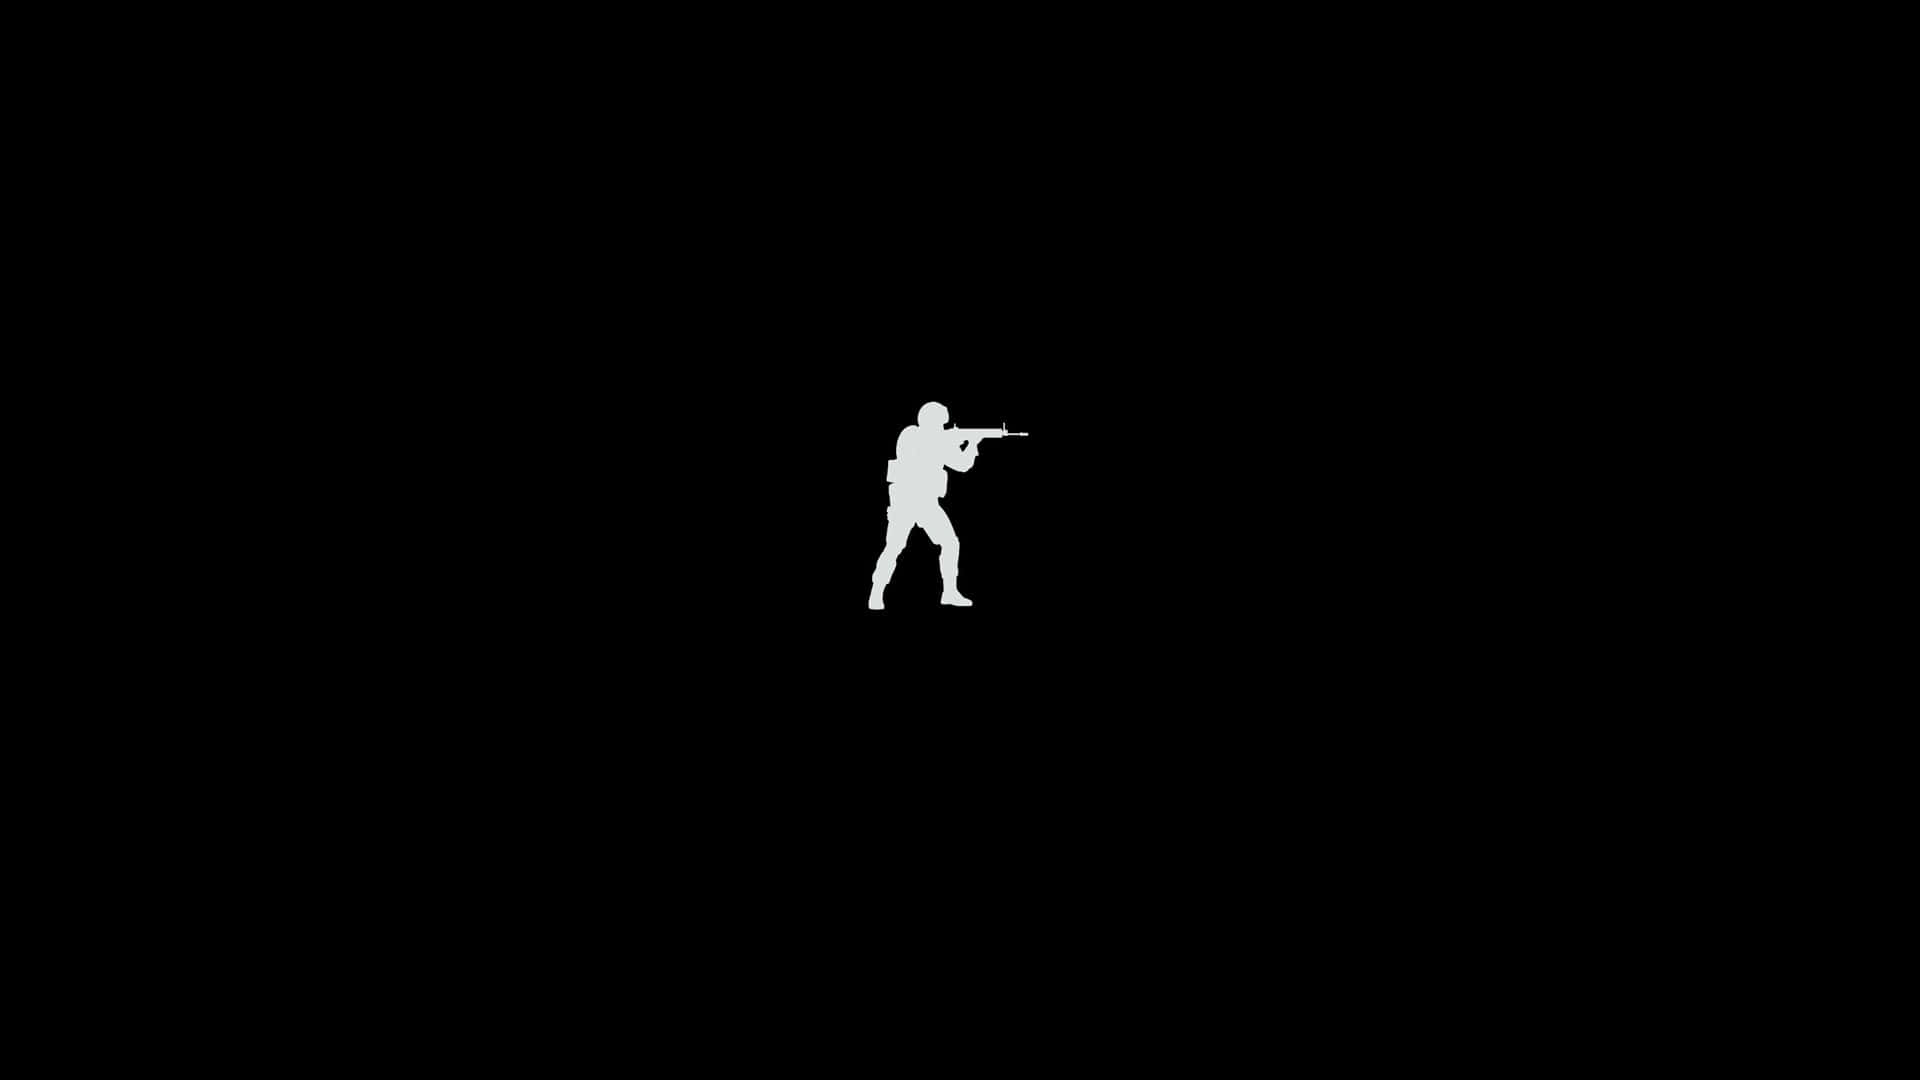 Simple Black And White 1080p Counter Strike Global Offensive Background